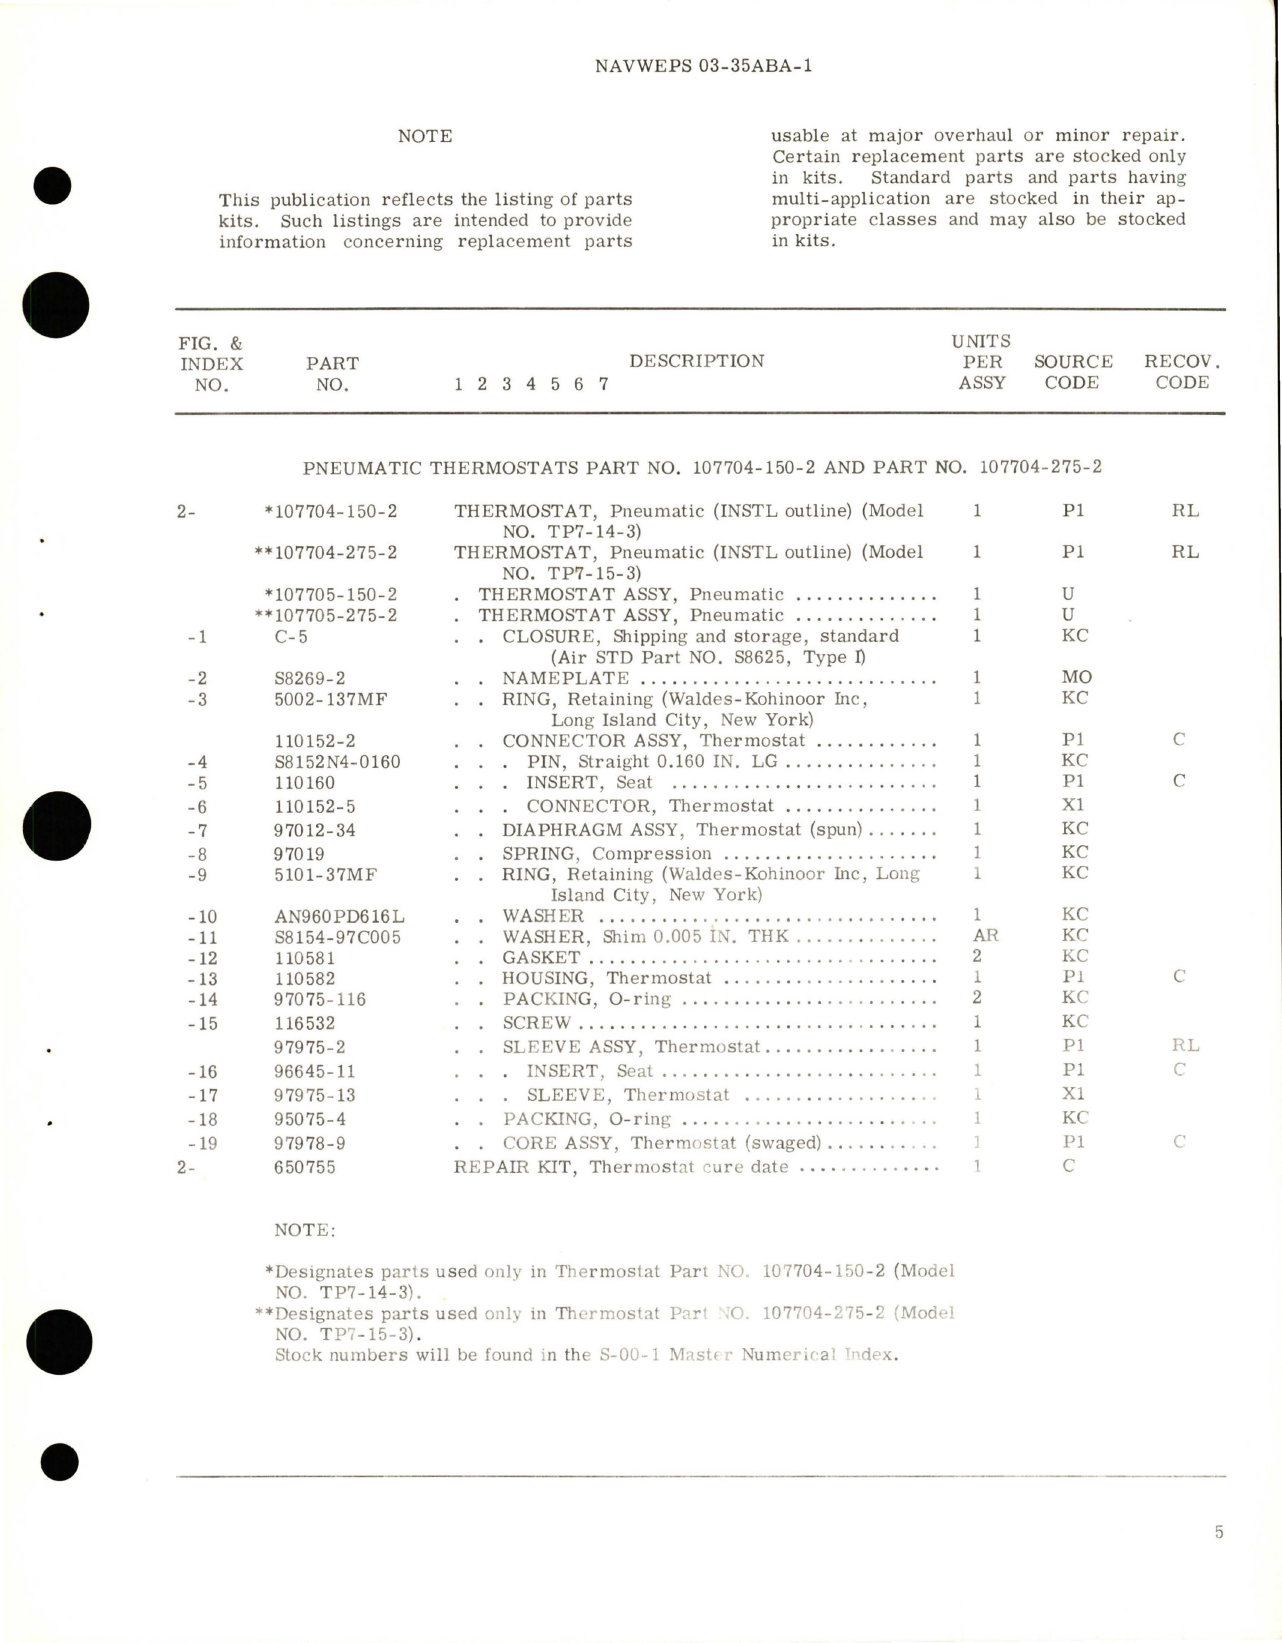 Sample page 5 from AirCorps Library document: Overhaul Instructions with Parts Breakdown for Pneumatic Thermostats - Parts 107704-150-2 and 107704-275-2